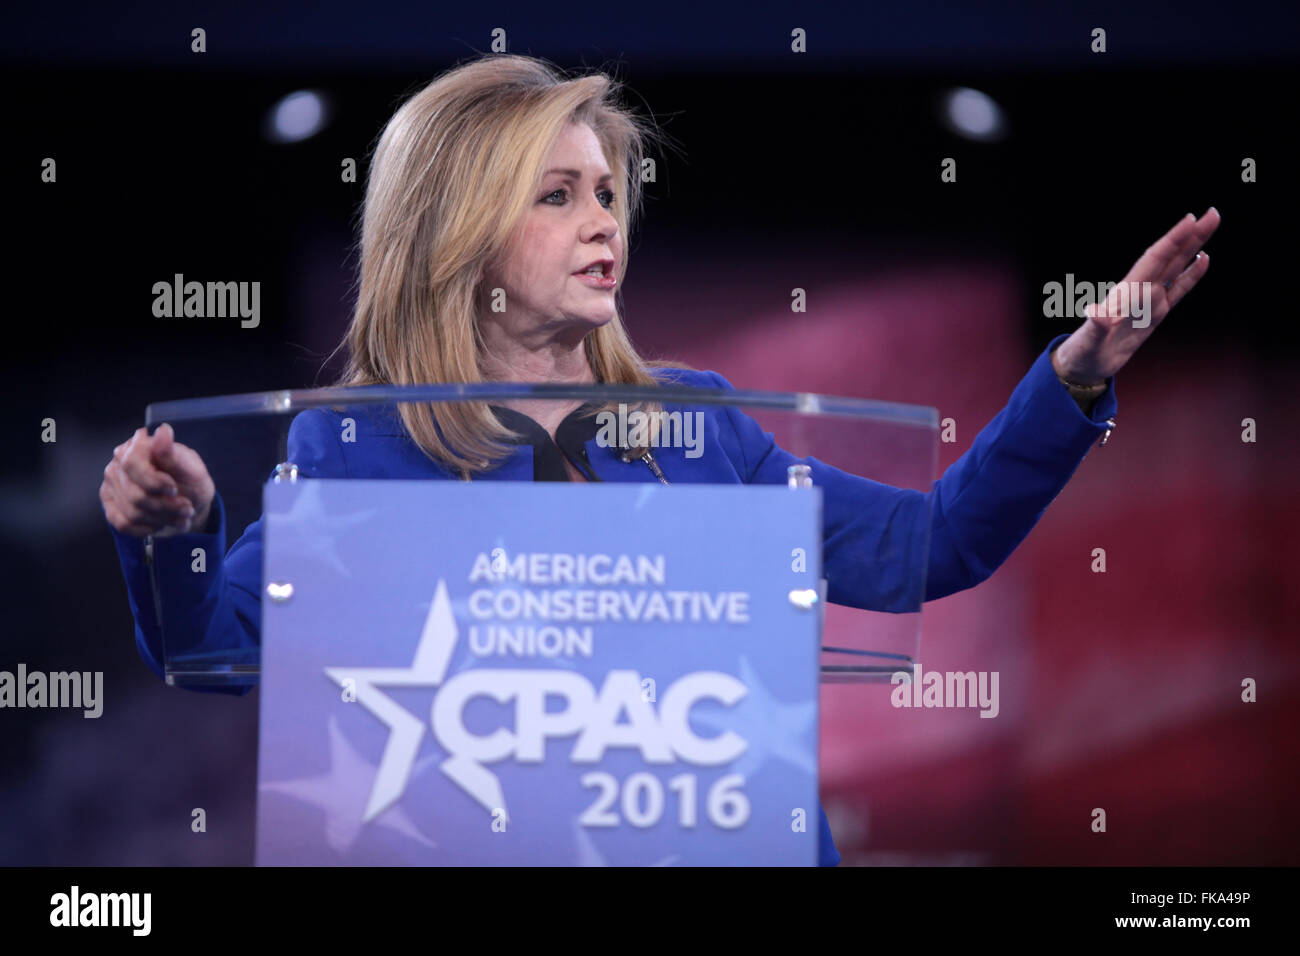 U.S. Rep. Marsha Blackburn of Tennessee addresses the annual American Conservative Union CPAC conference at National Harbor March 3, 2016 in Oxon Hill, Maryland. Stock Photo